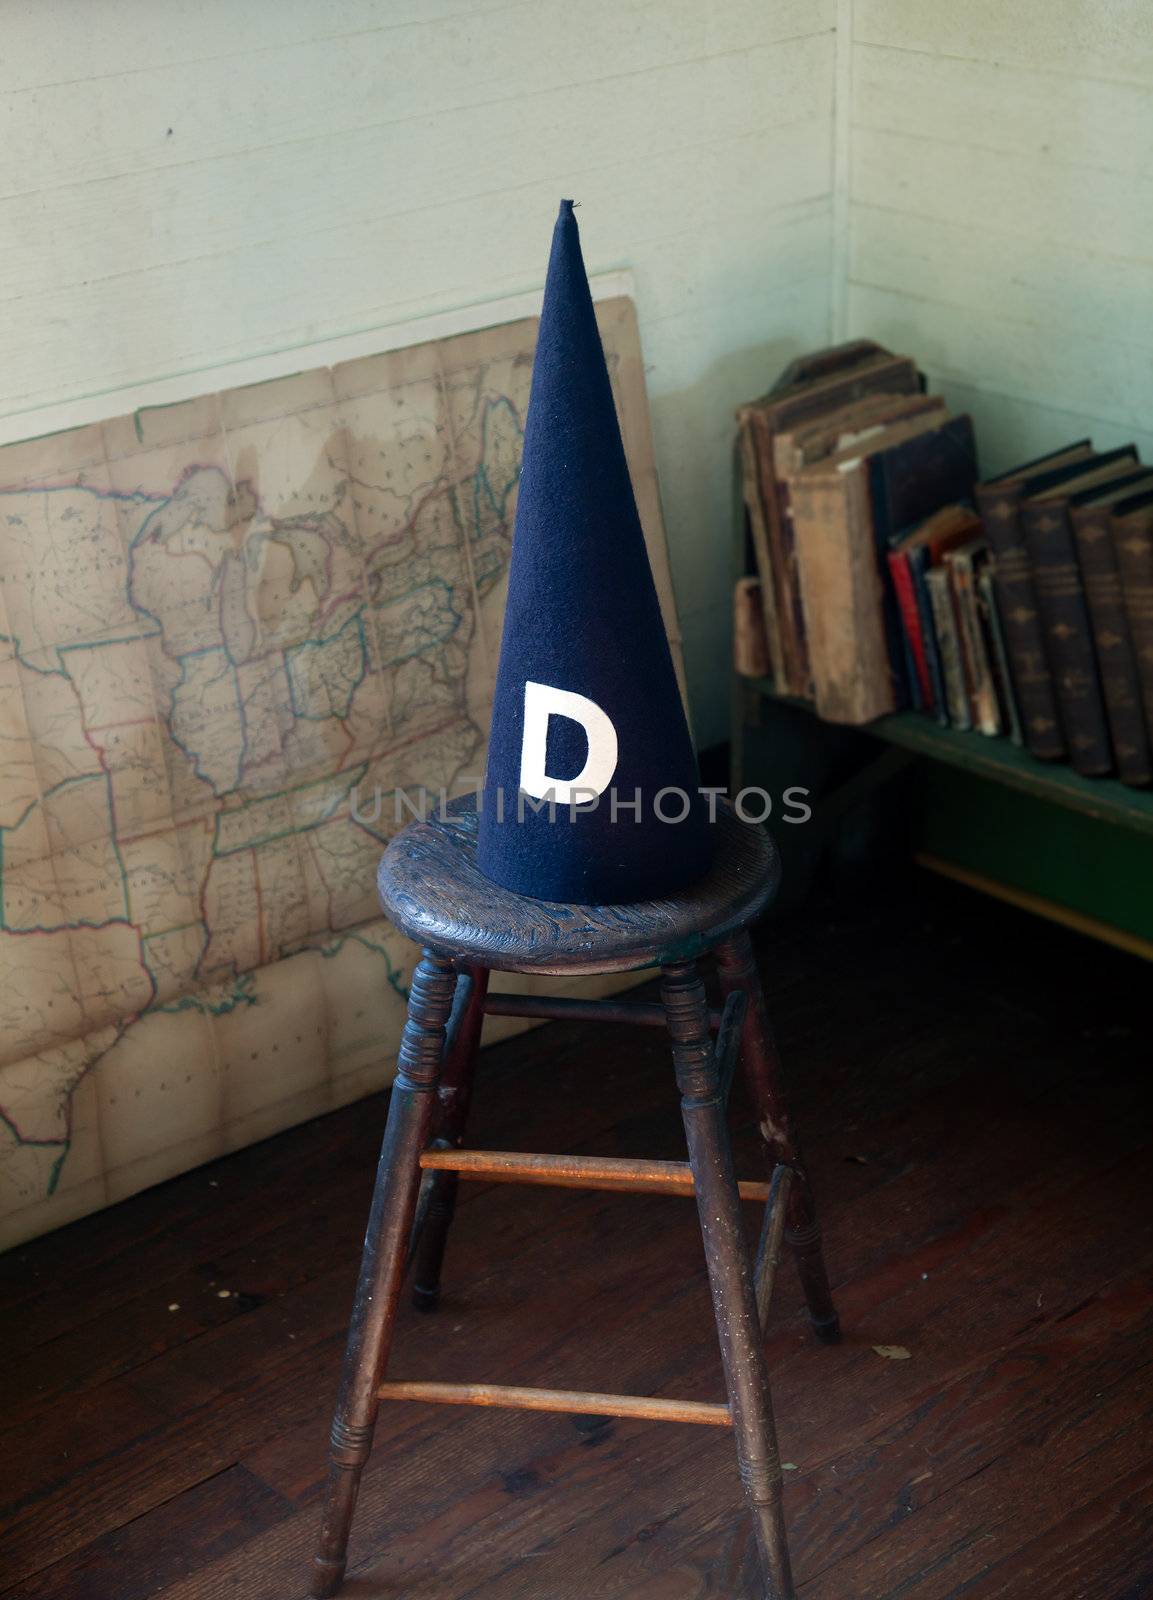 Dunce cap standing on a stool in an old schoolhouse